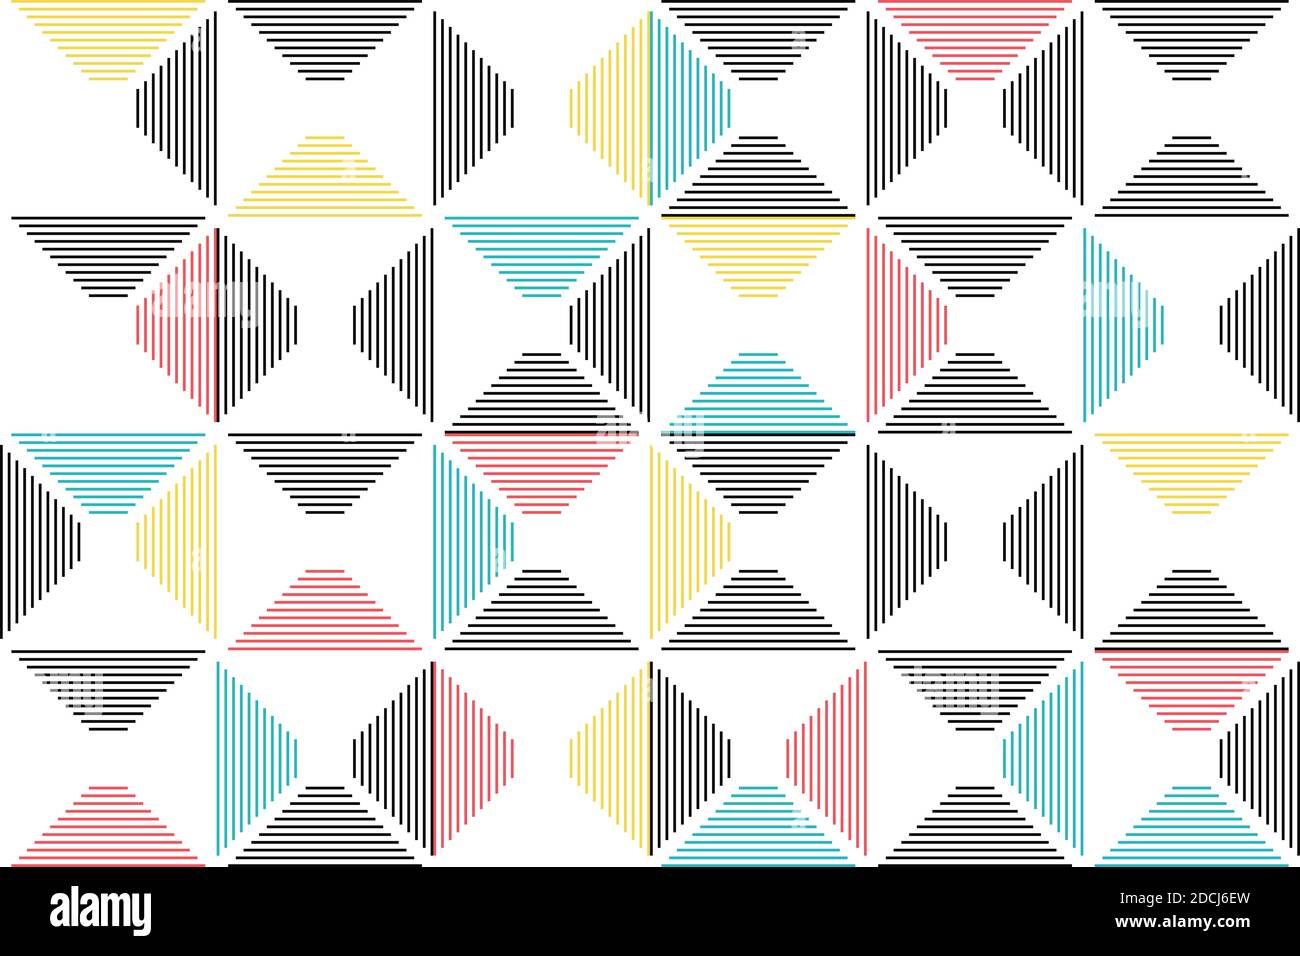 Seamless abstract background pattern made with lines forming